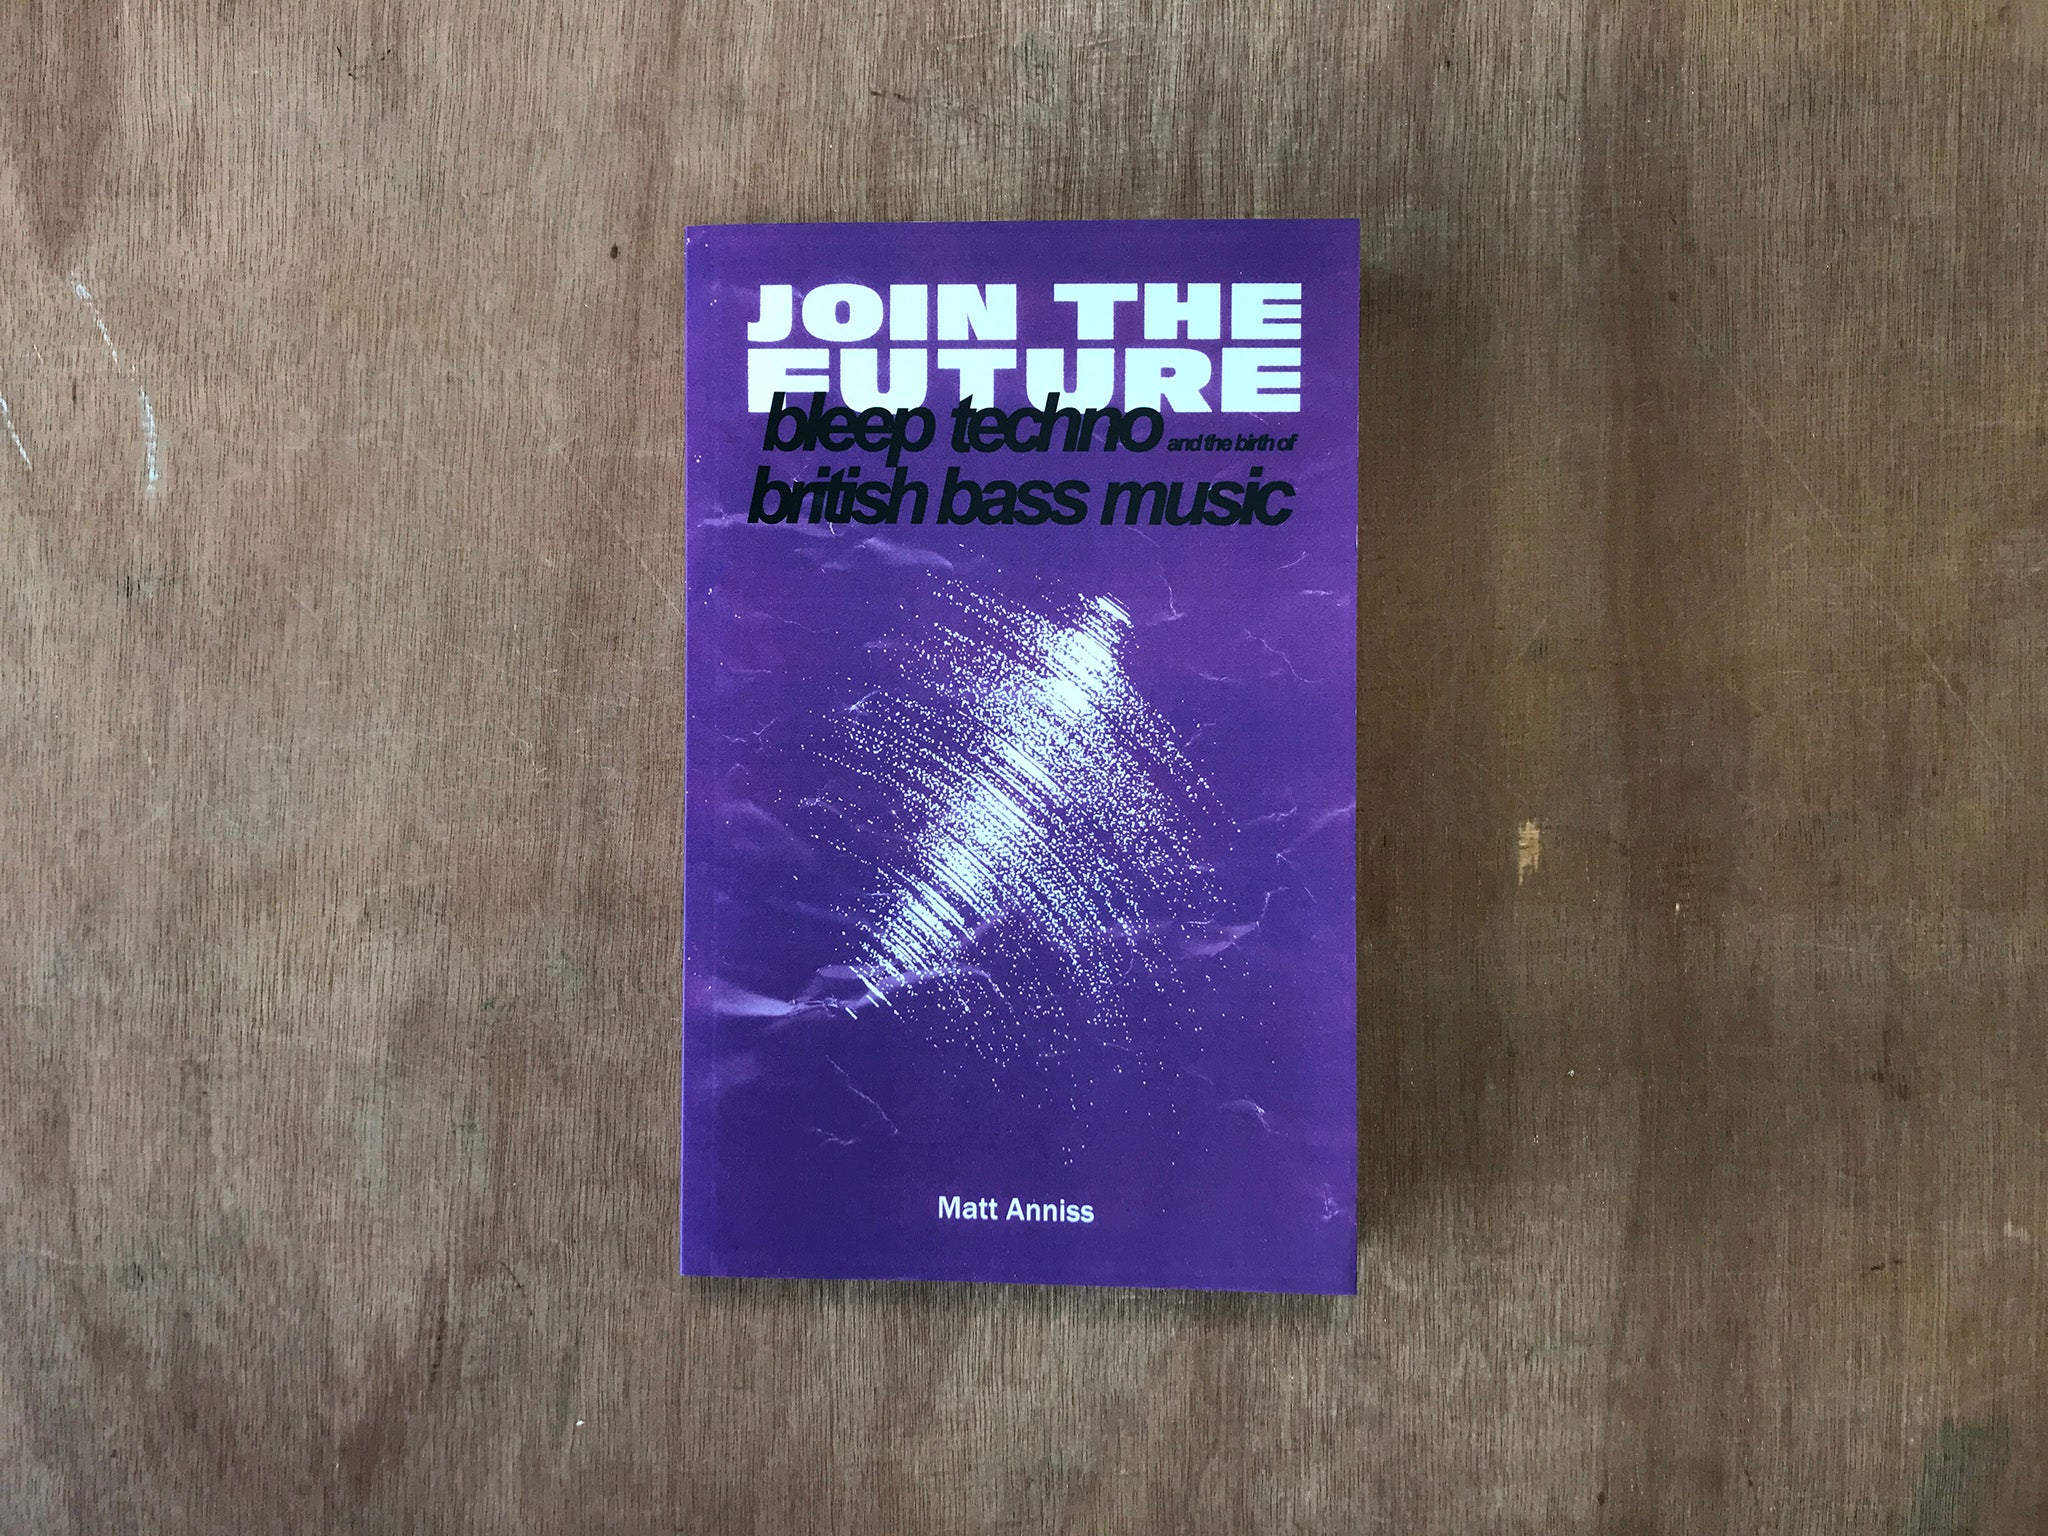 JOIN THE FUTURE: BLEEP TECHNO AND THE BIRTH OF BRITISH BASS MUSIC by Matt Anniss